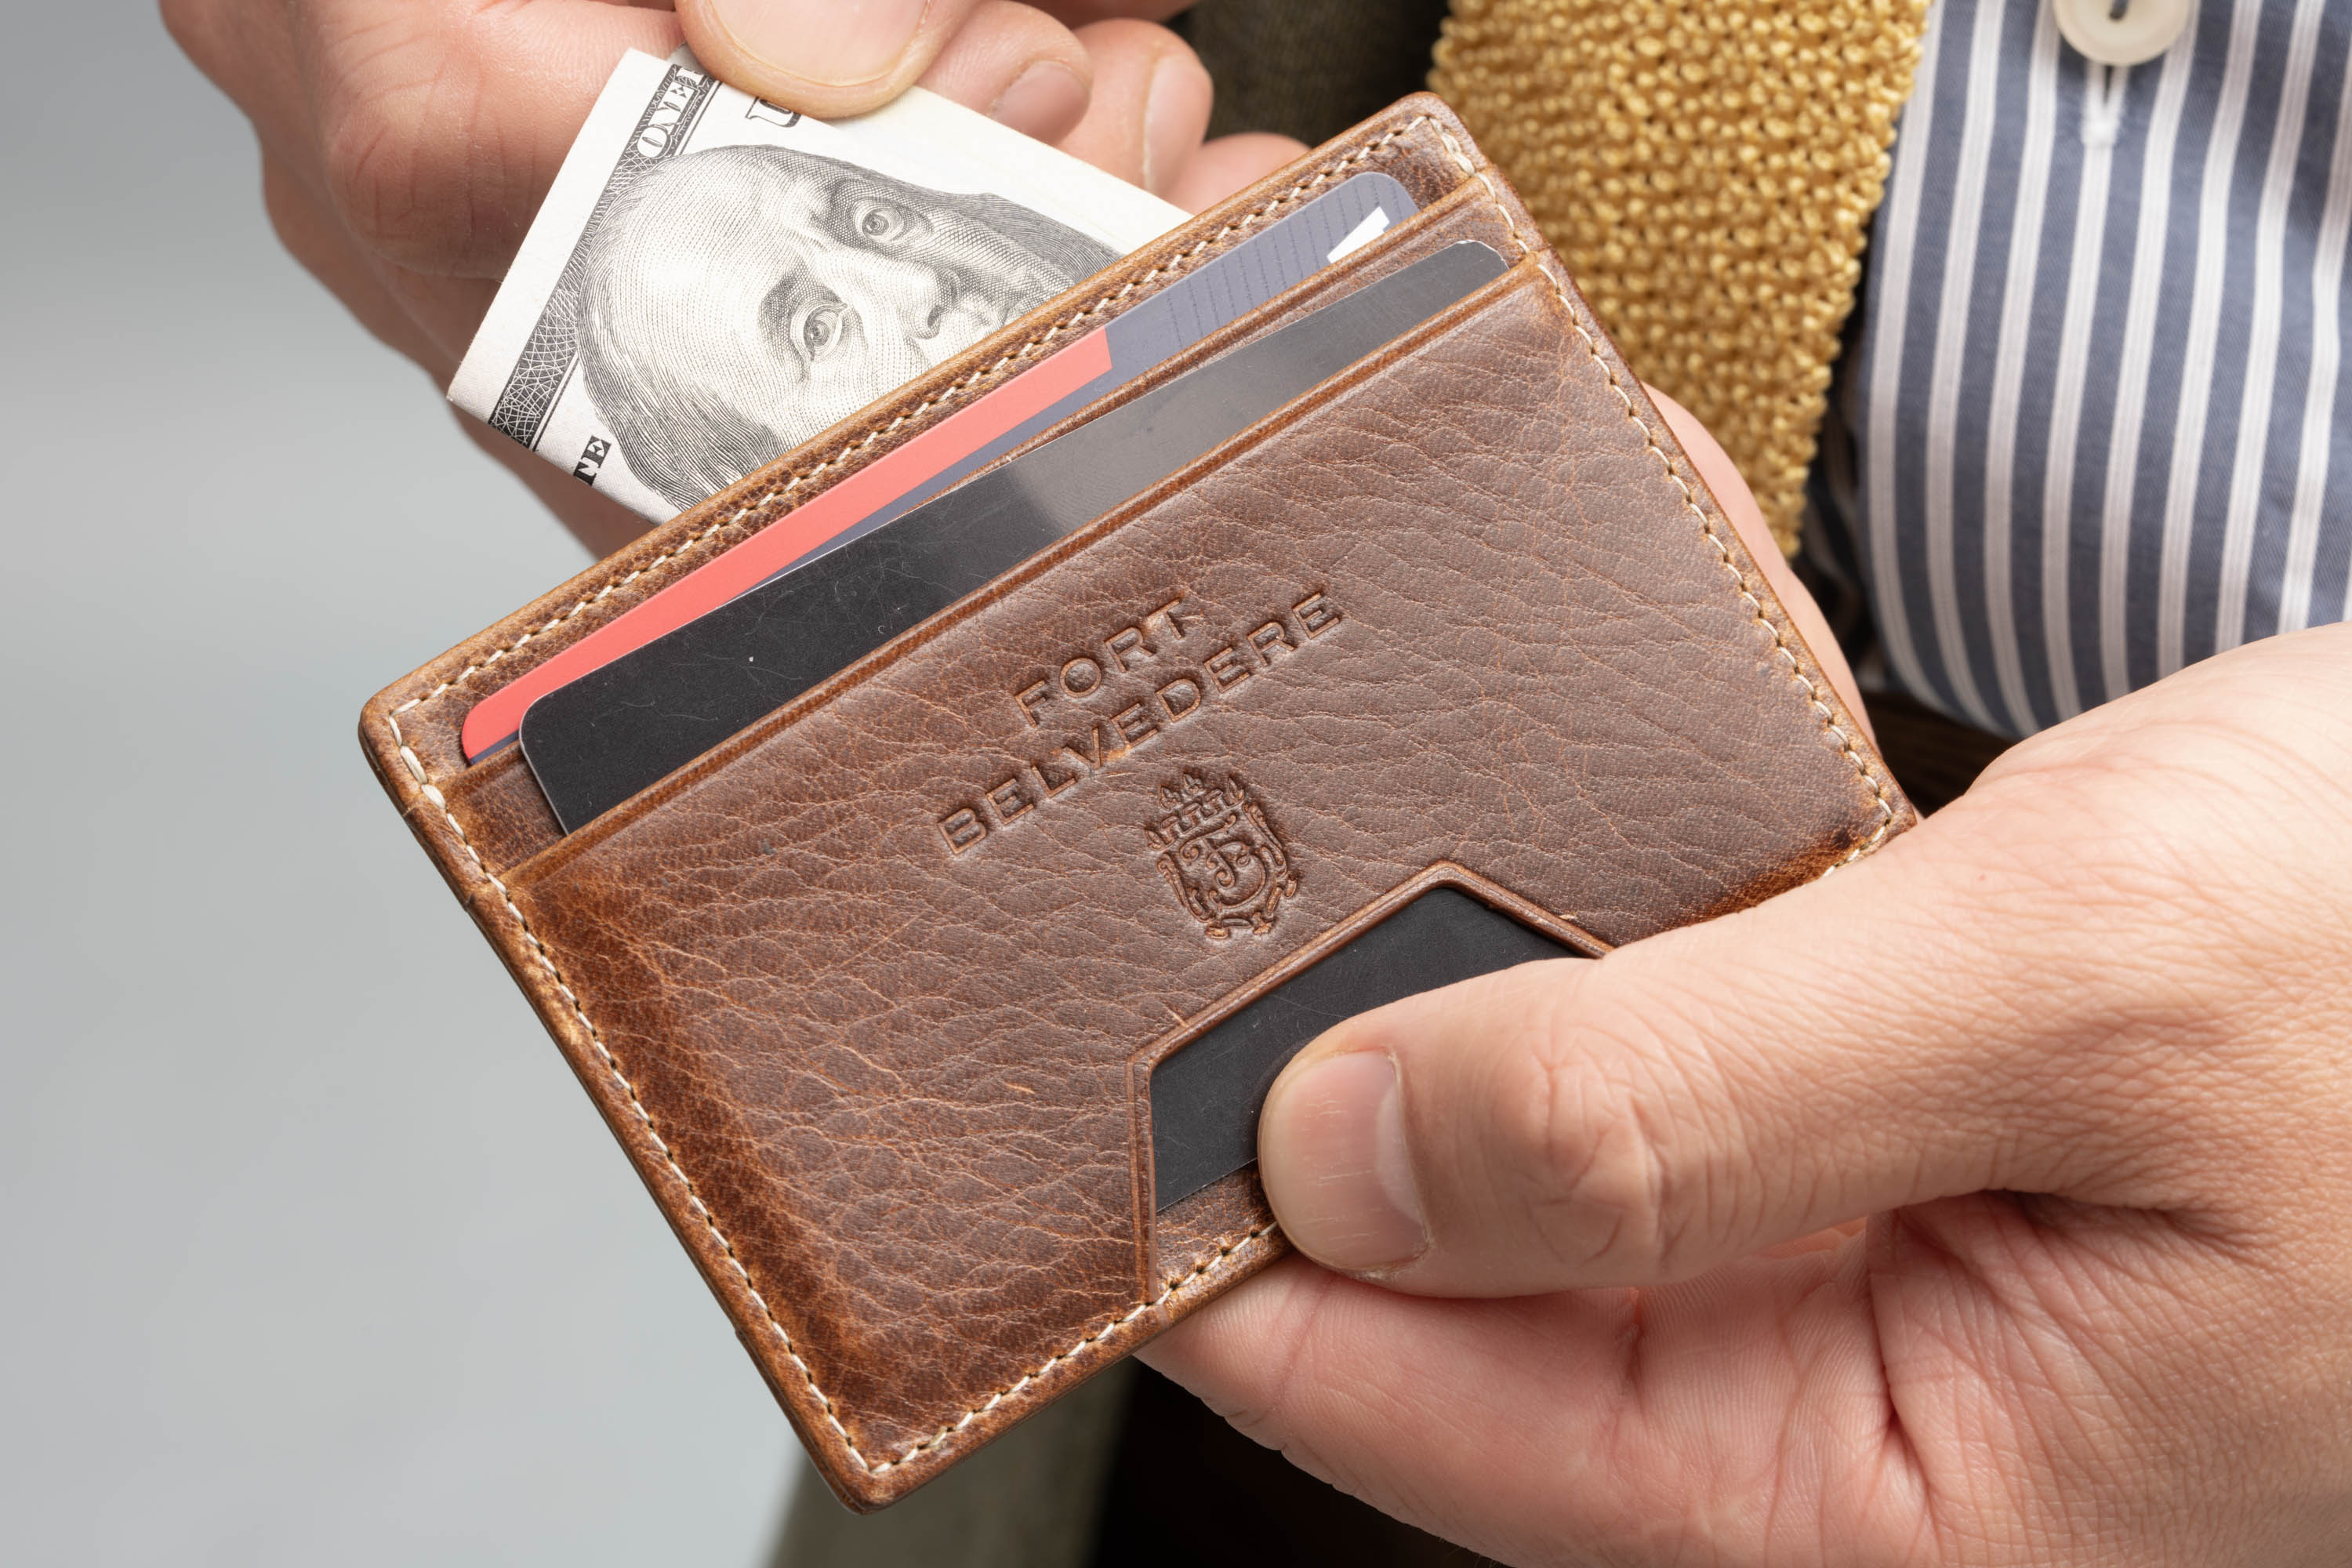 Slim Wallet - 4CC - Dumont Saddle Brown Full-Grain Leather paper and credit card compartments. 